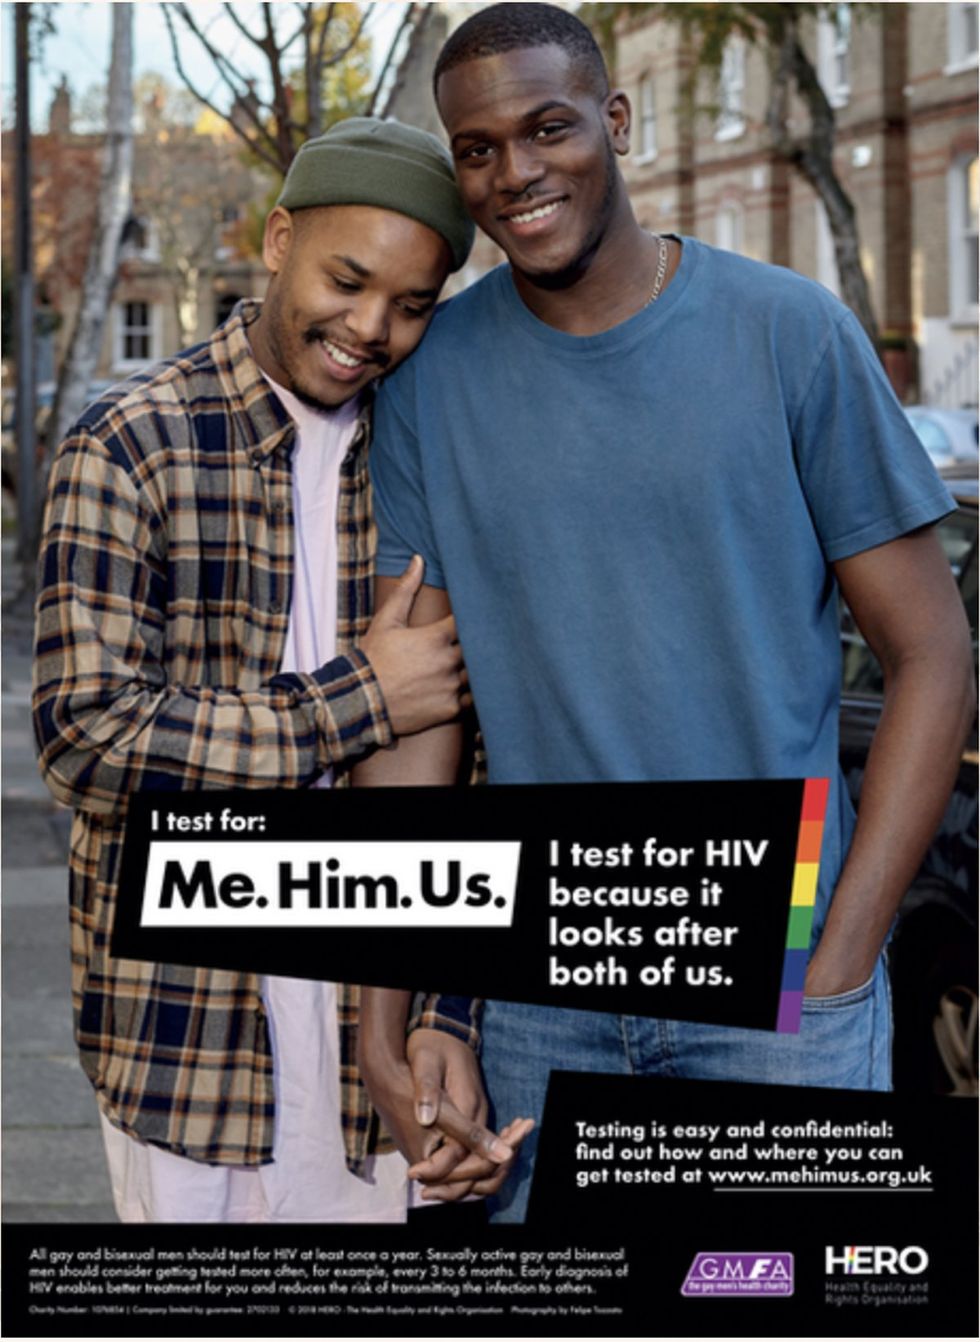 Historical Fliers Gay Men Fighting AIDS Campaign